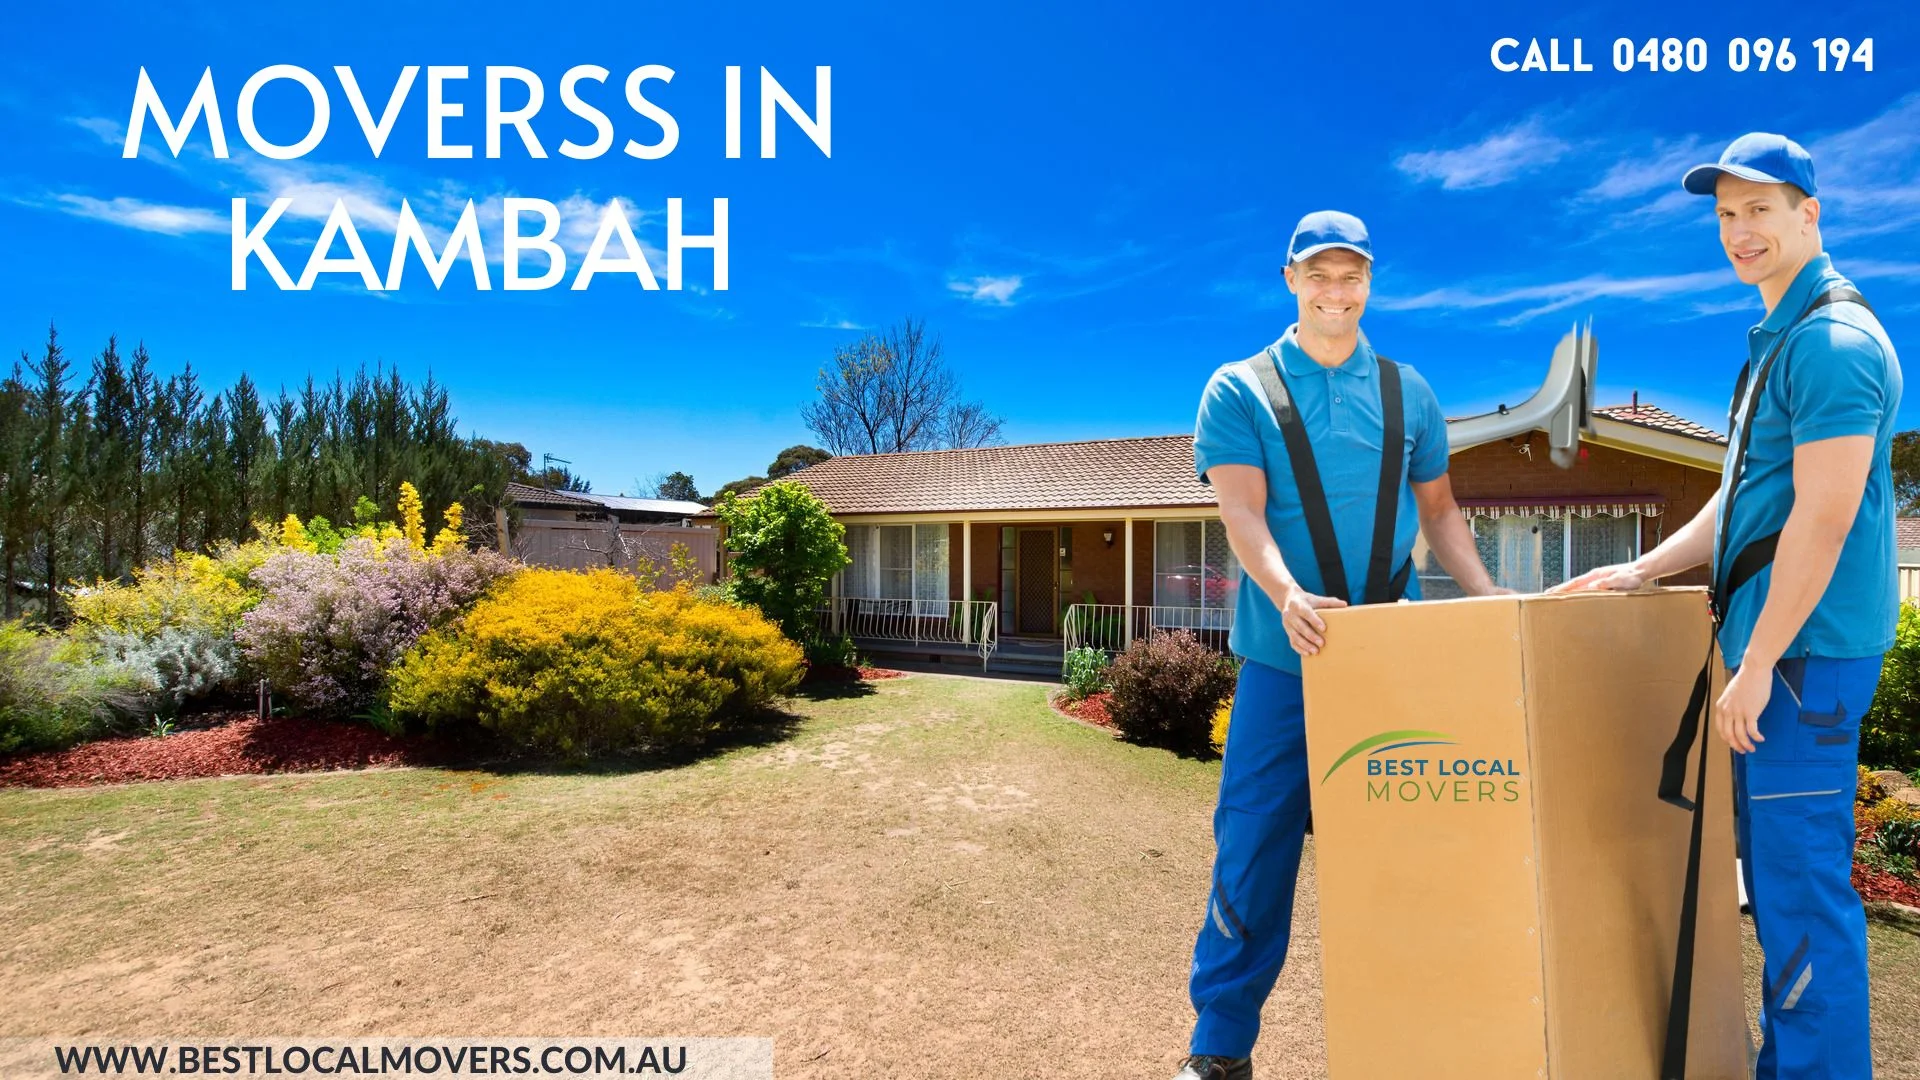 Movers in Kambah